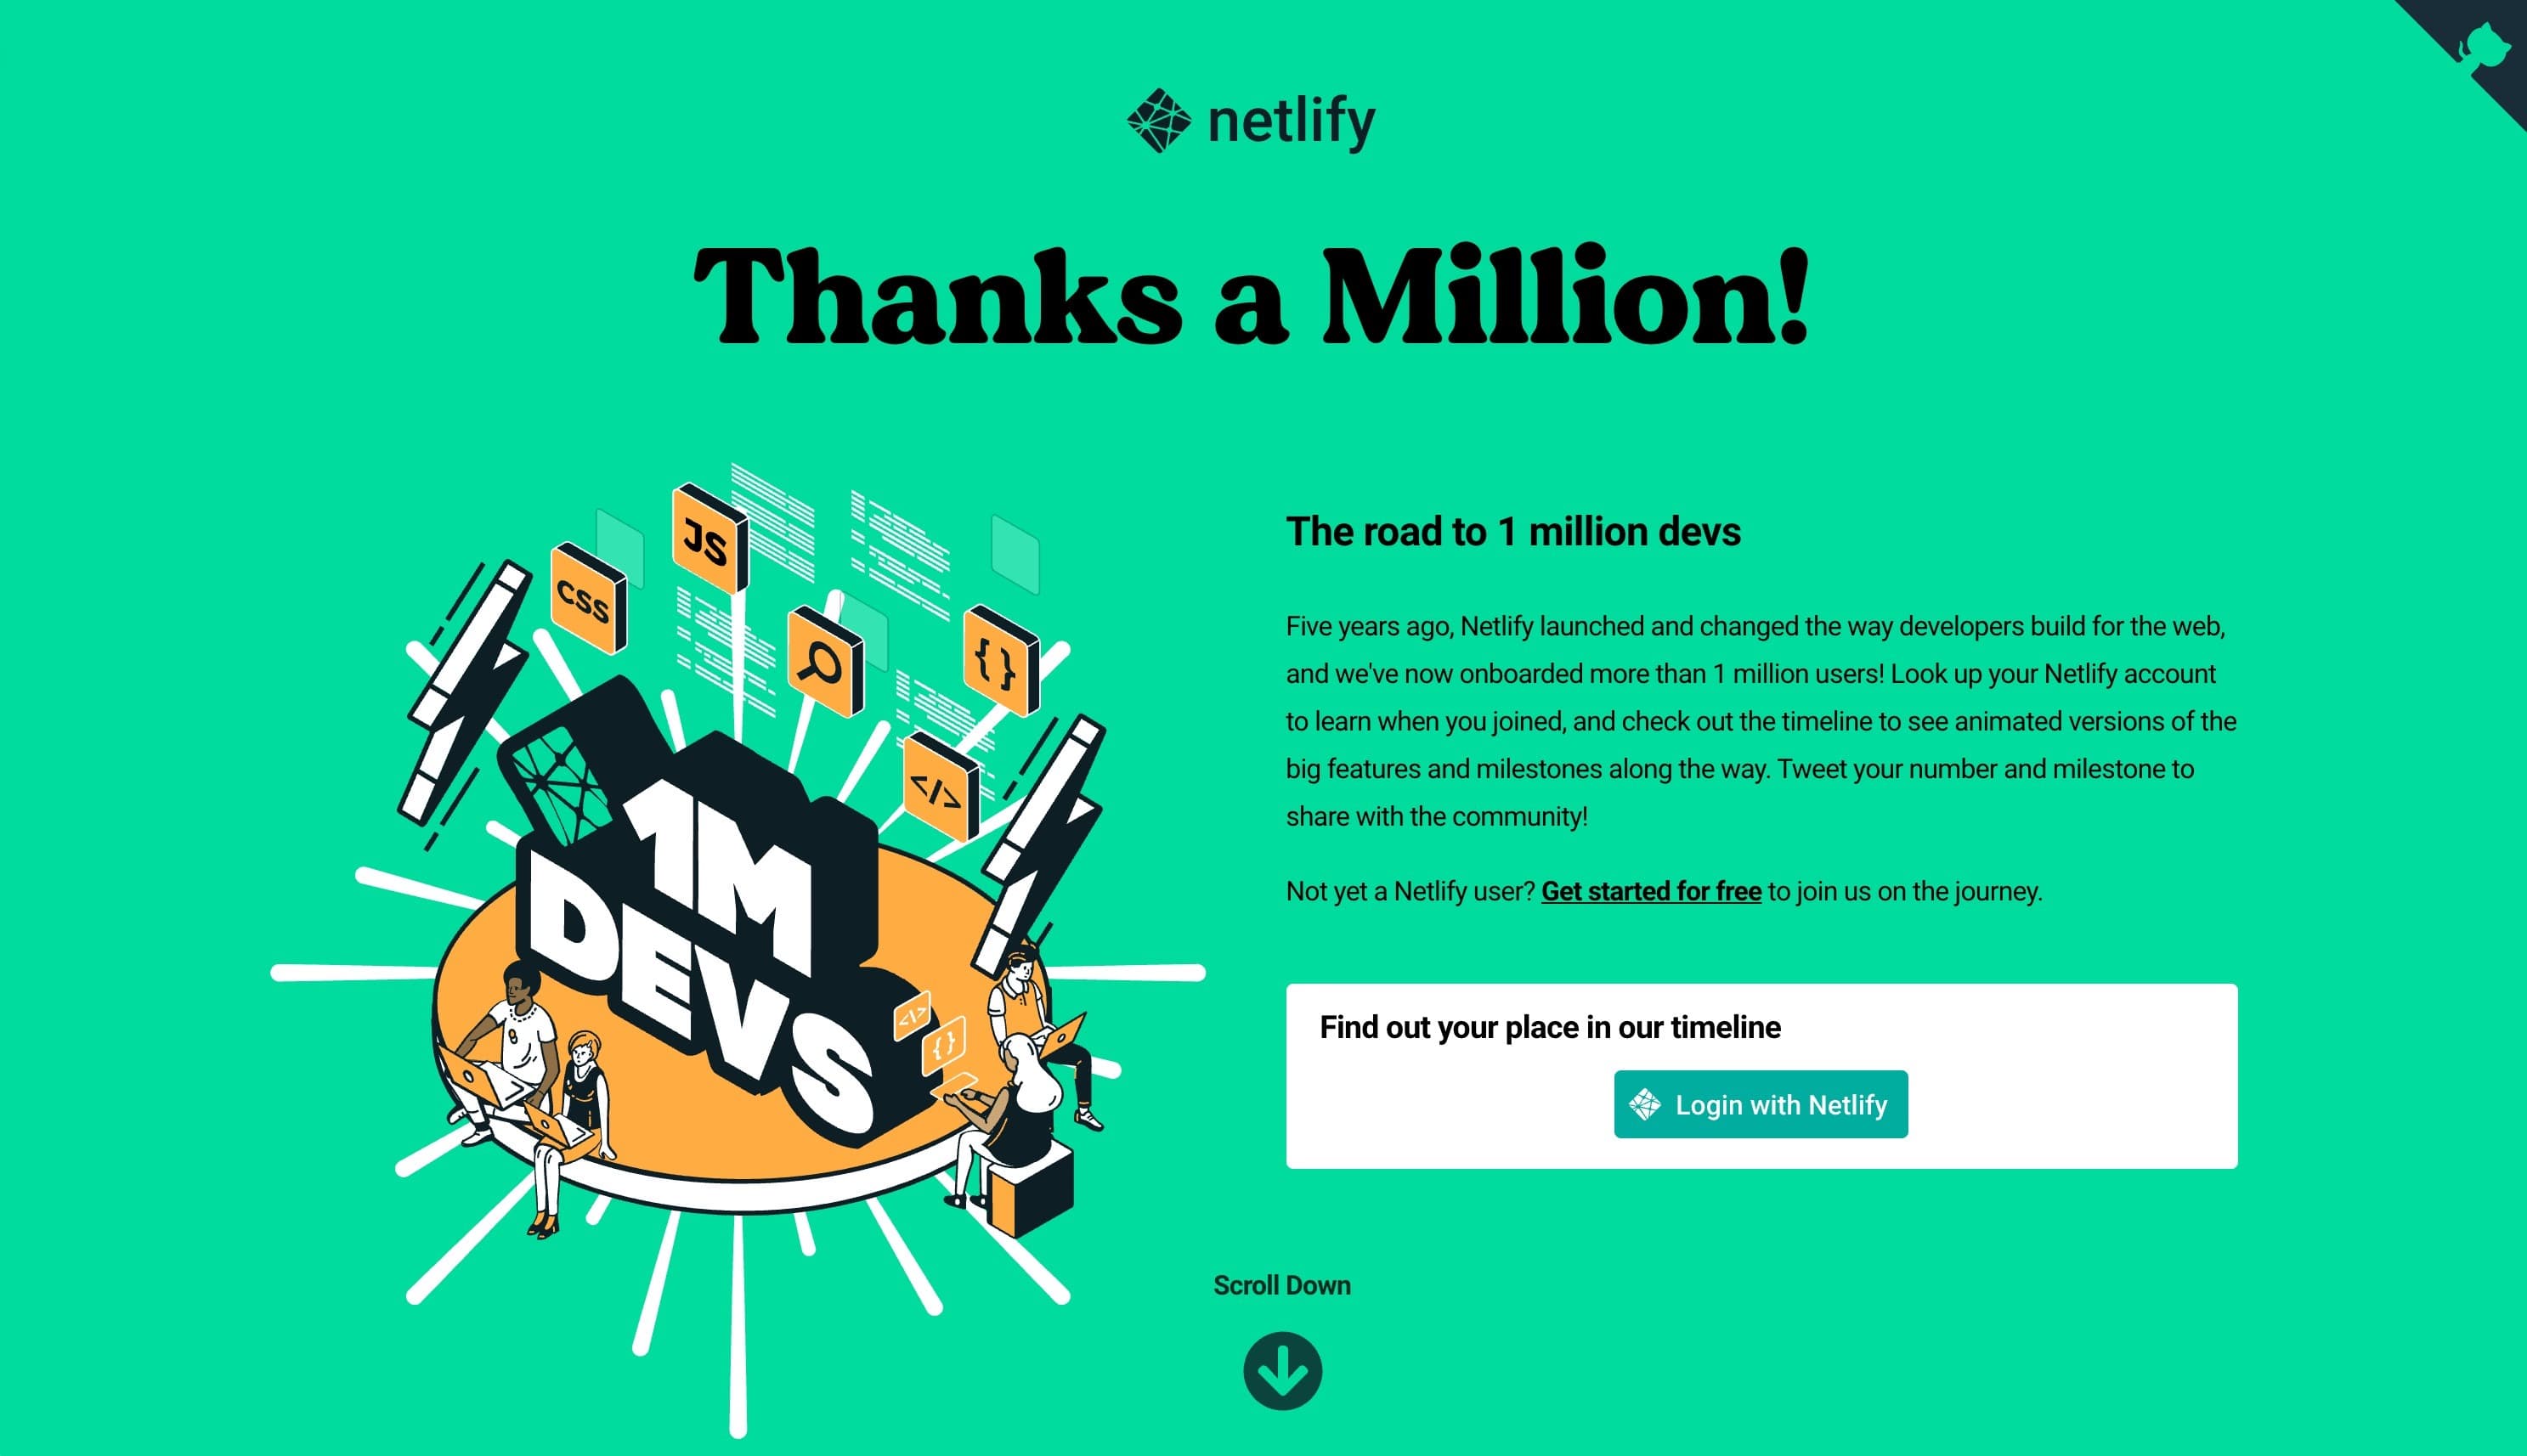 A very green landing page for Netlify